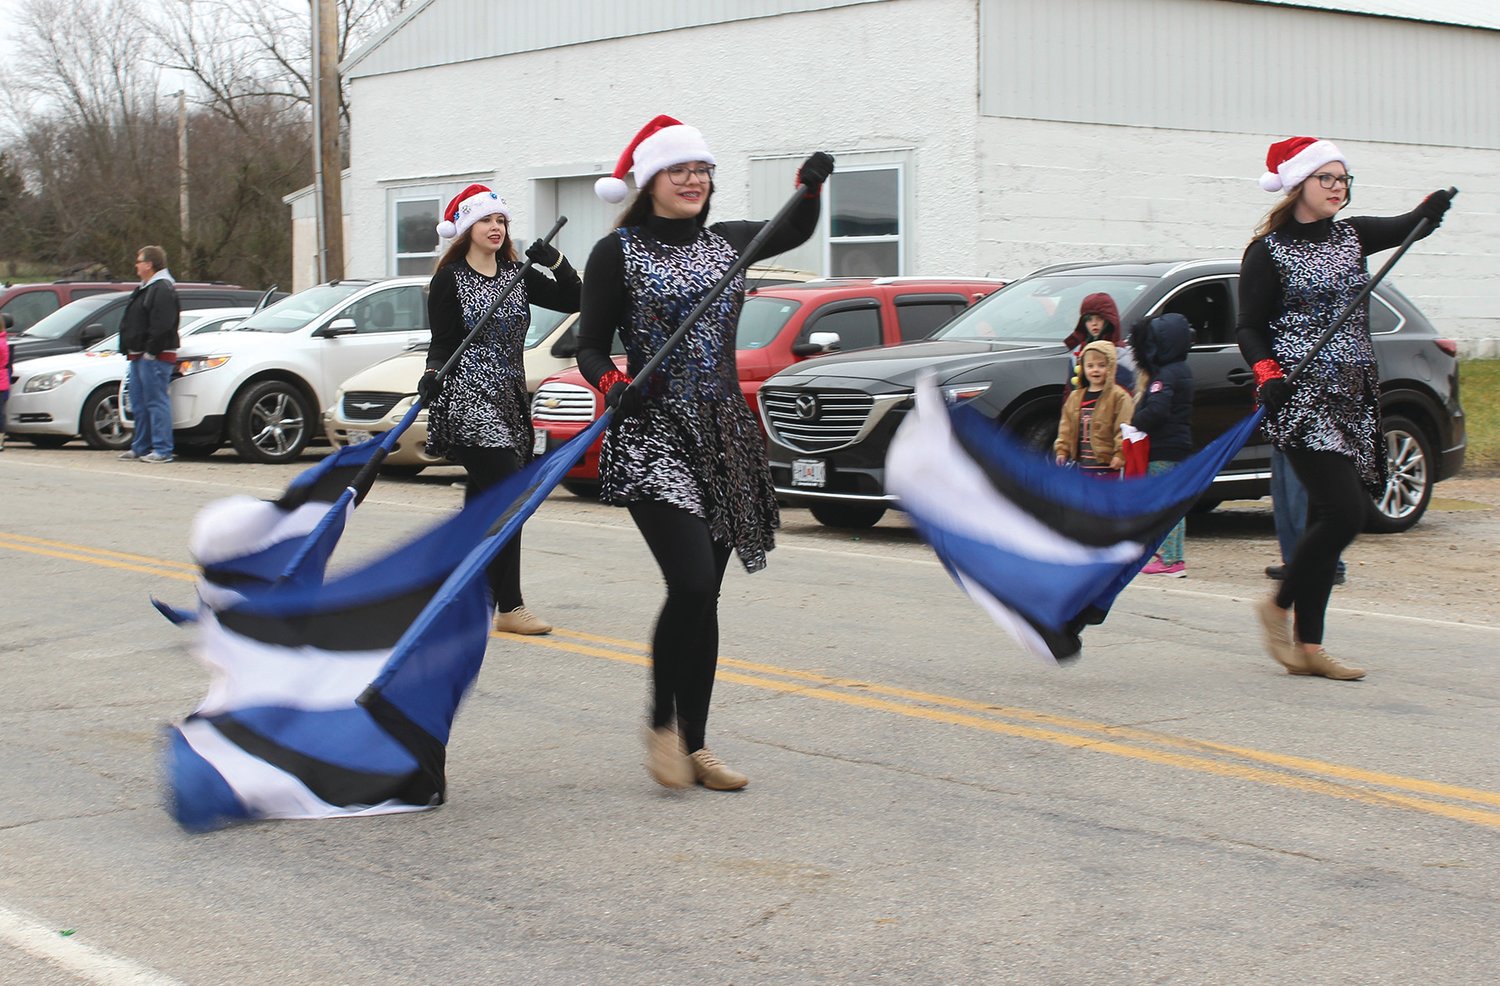 Hartville students perform a routine with colorful flags for the Hartville High School band.